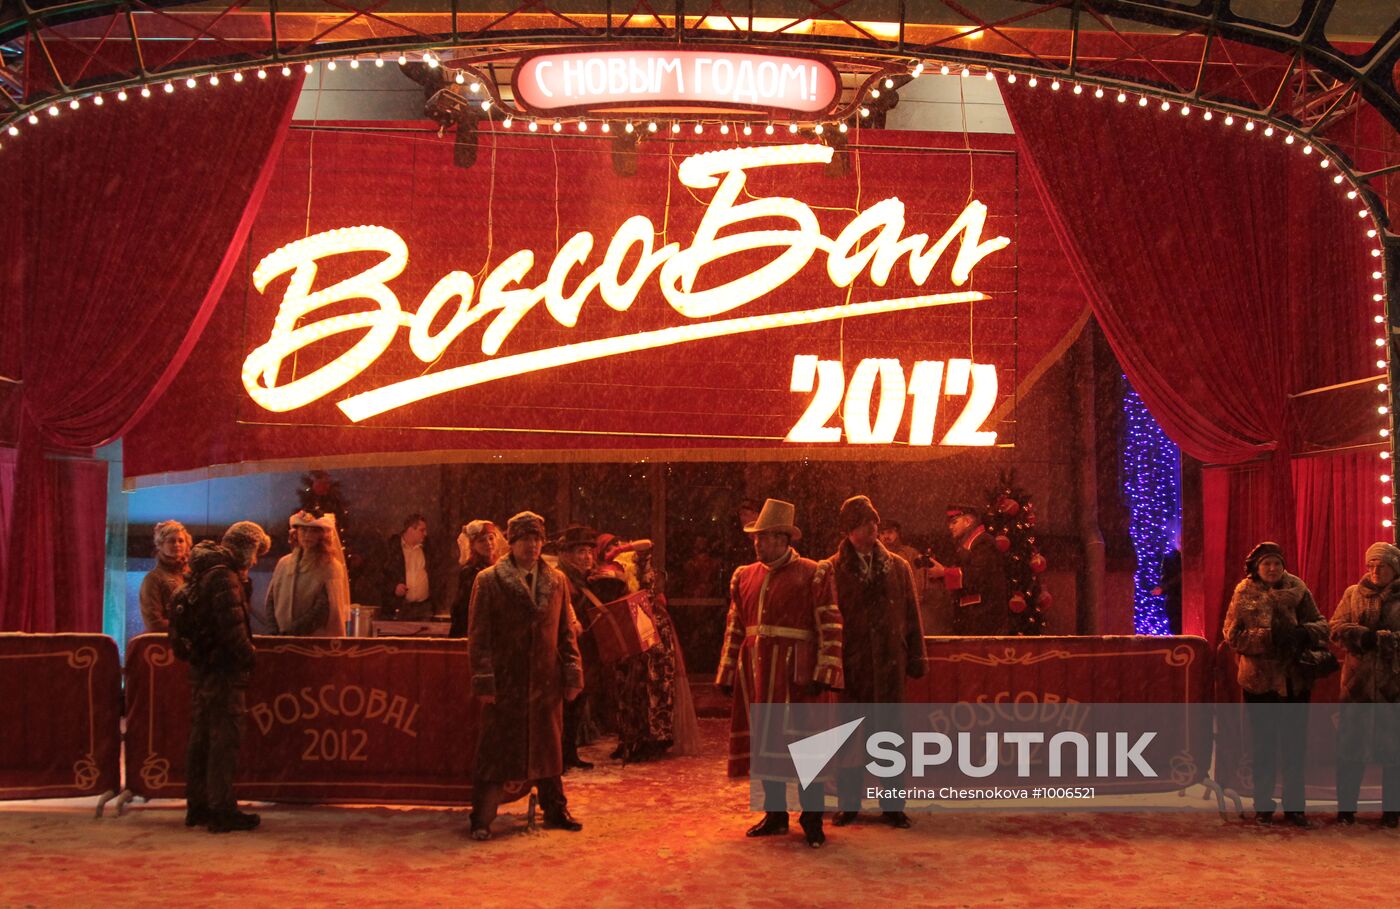 Traditional Bosco Ball, Moscow